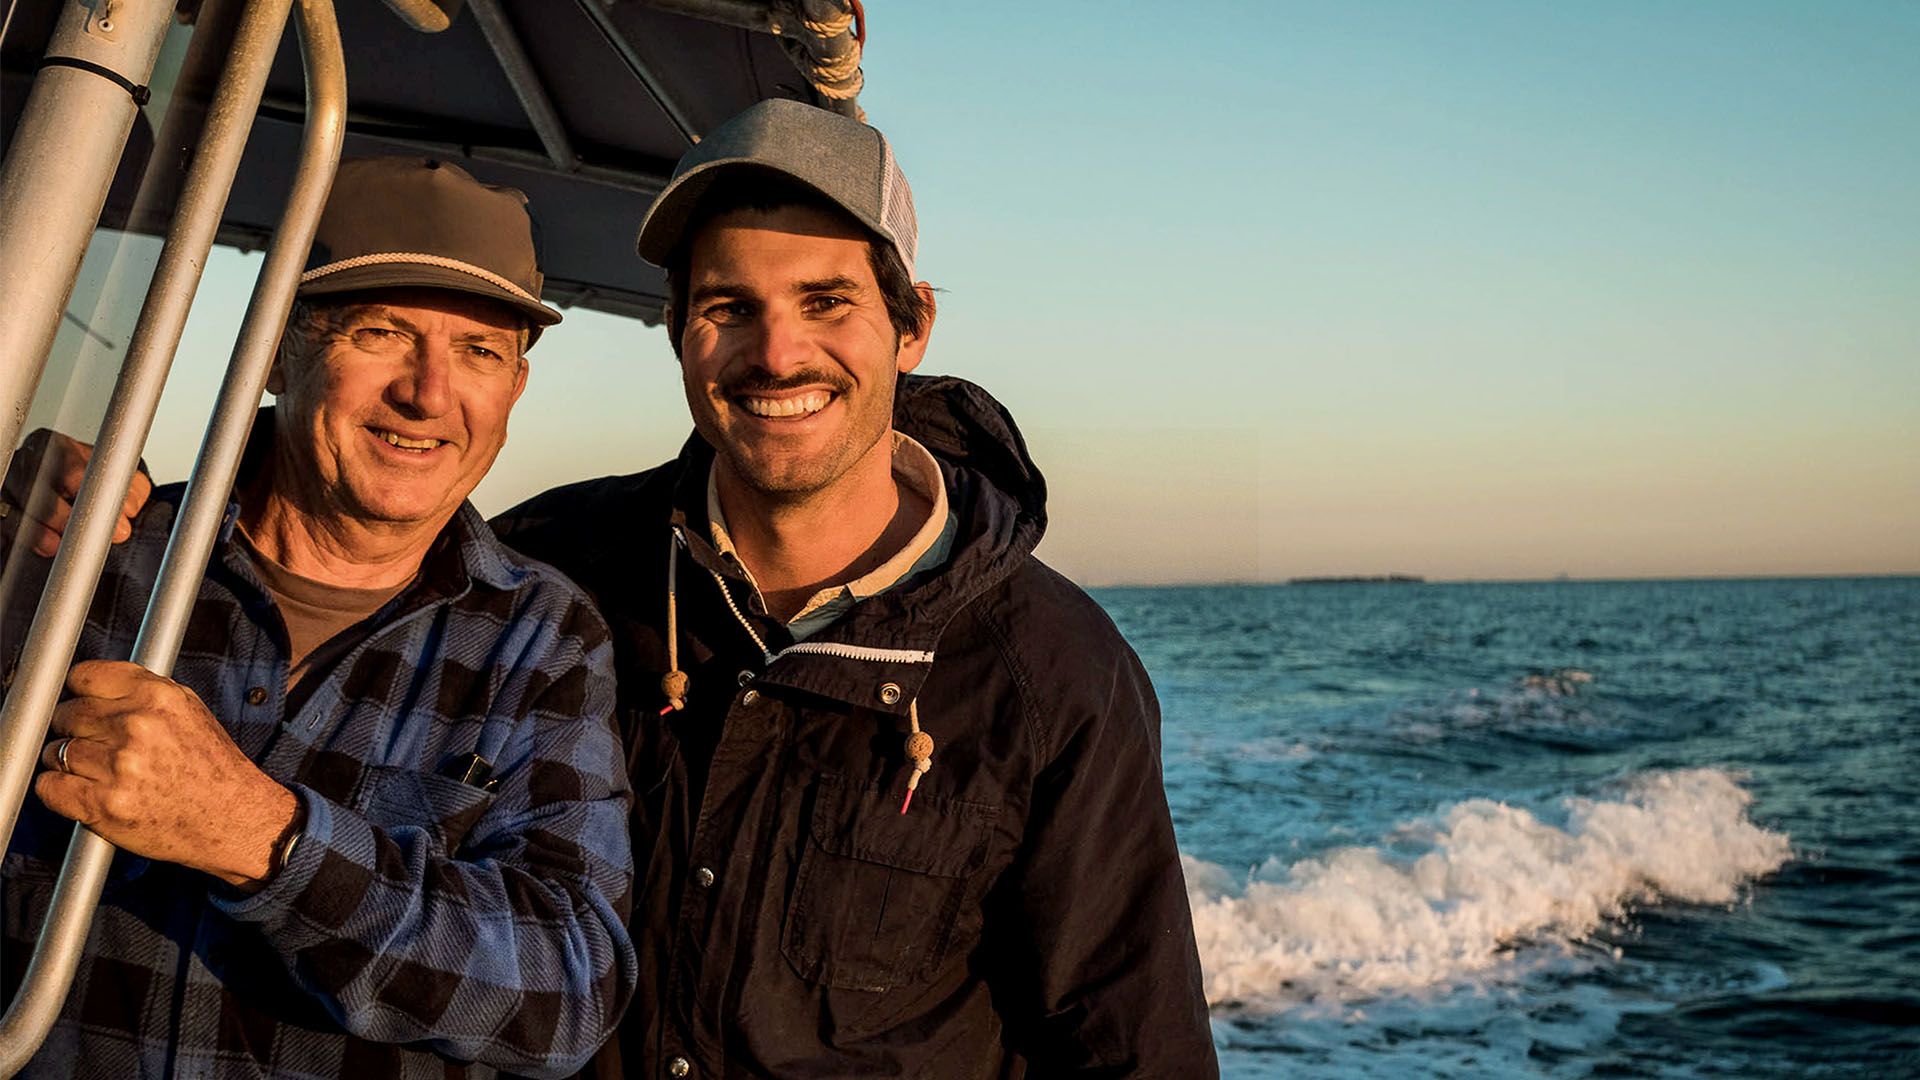 Two men stand on fishing boat smiling at camera with ocean in background